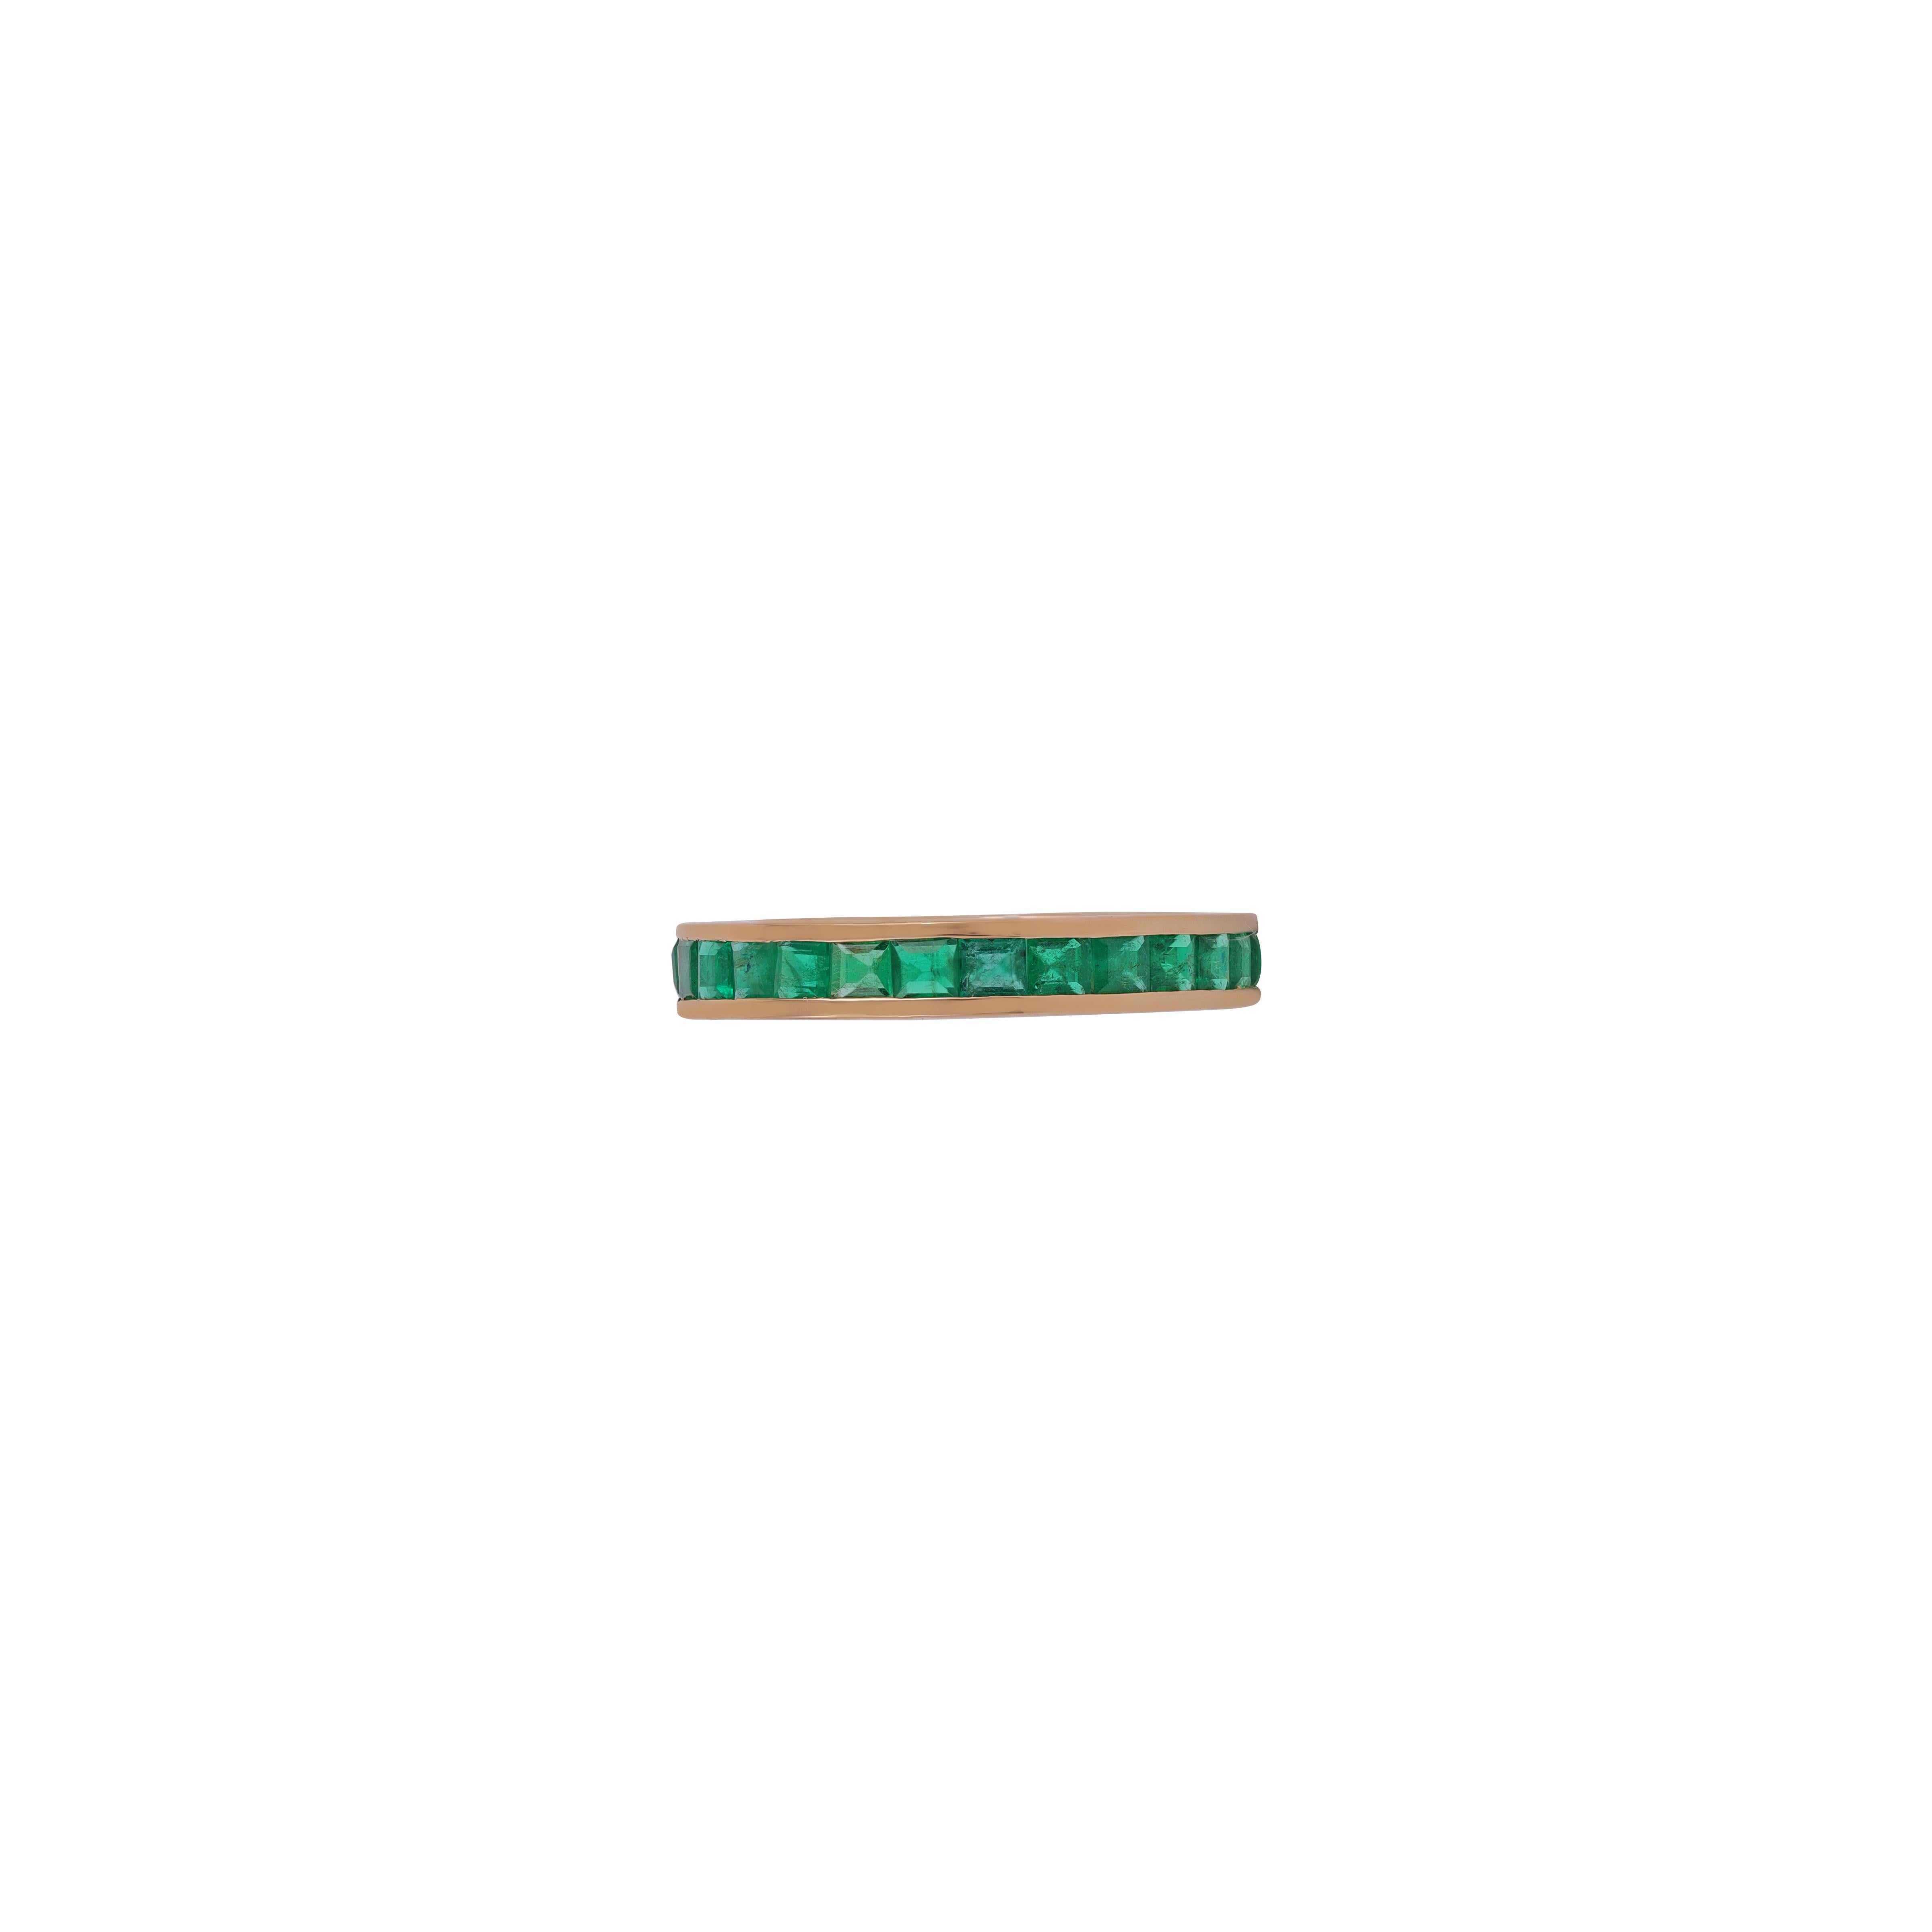 18 karat gold channel set emerald step cut band ring.

This beautiful linear band ring with lustrous emeralds . Elegance and chic in one, this ring features good quality square shaped step cut emeralds channel set in a linear pattern. Wear it day in